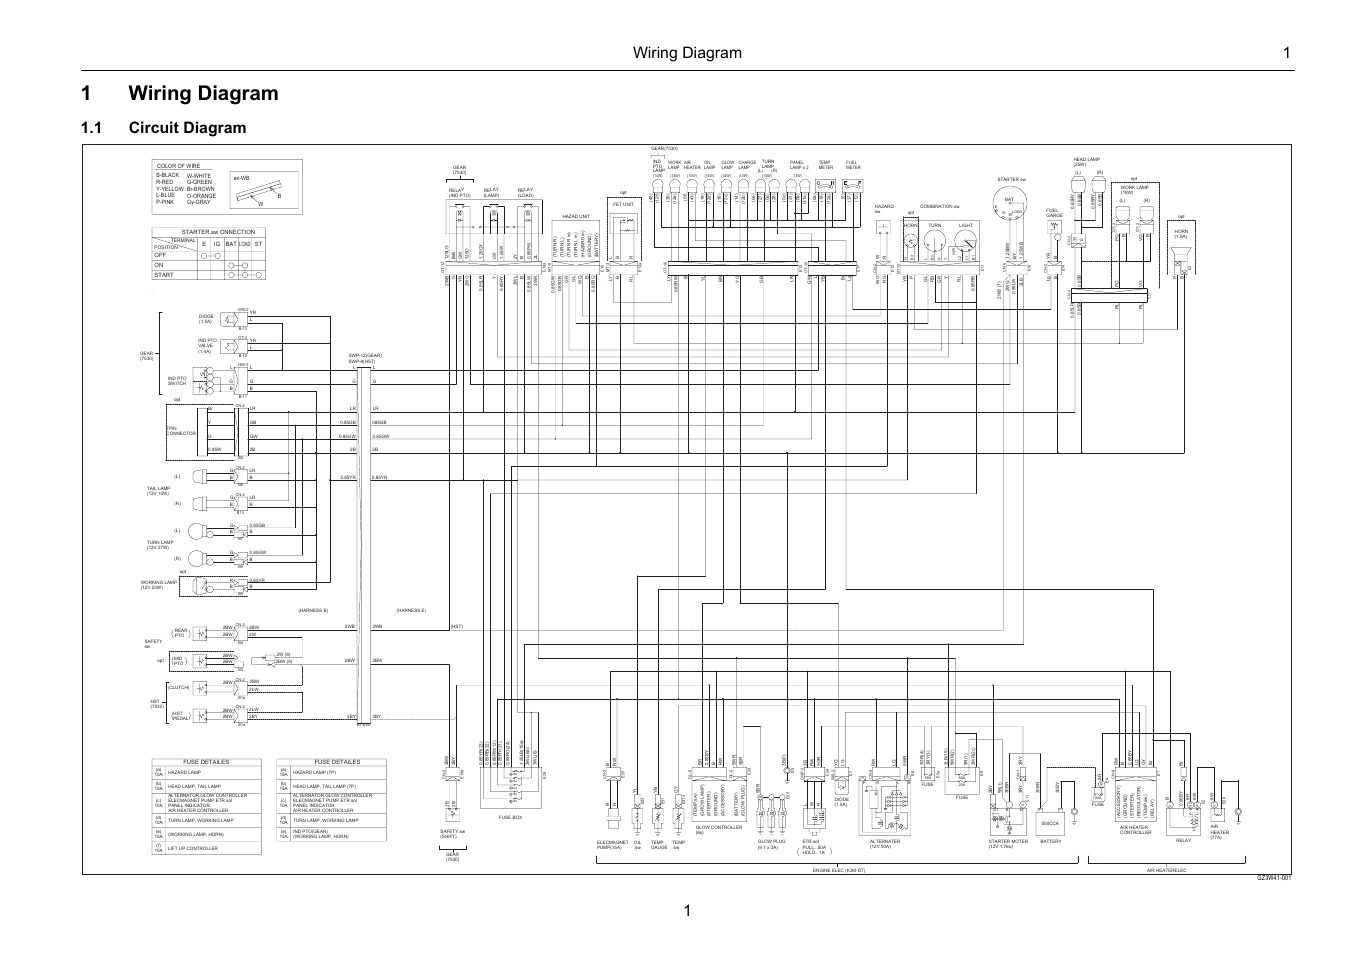 1wiring diagram, Wiring diagram 1 1, 1 circuit diagram | Cub Cadet 7532 User Manual | Page 213 / 232